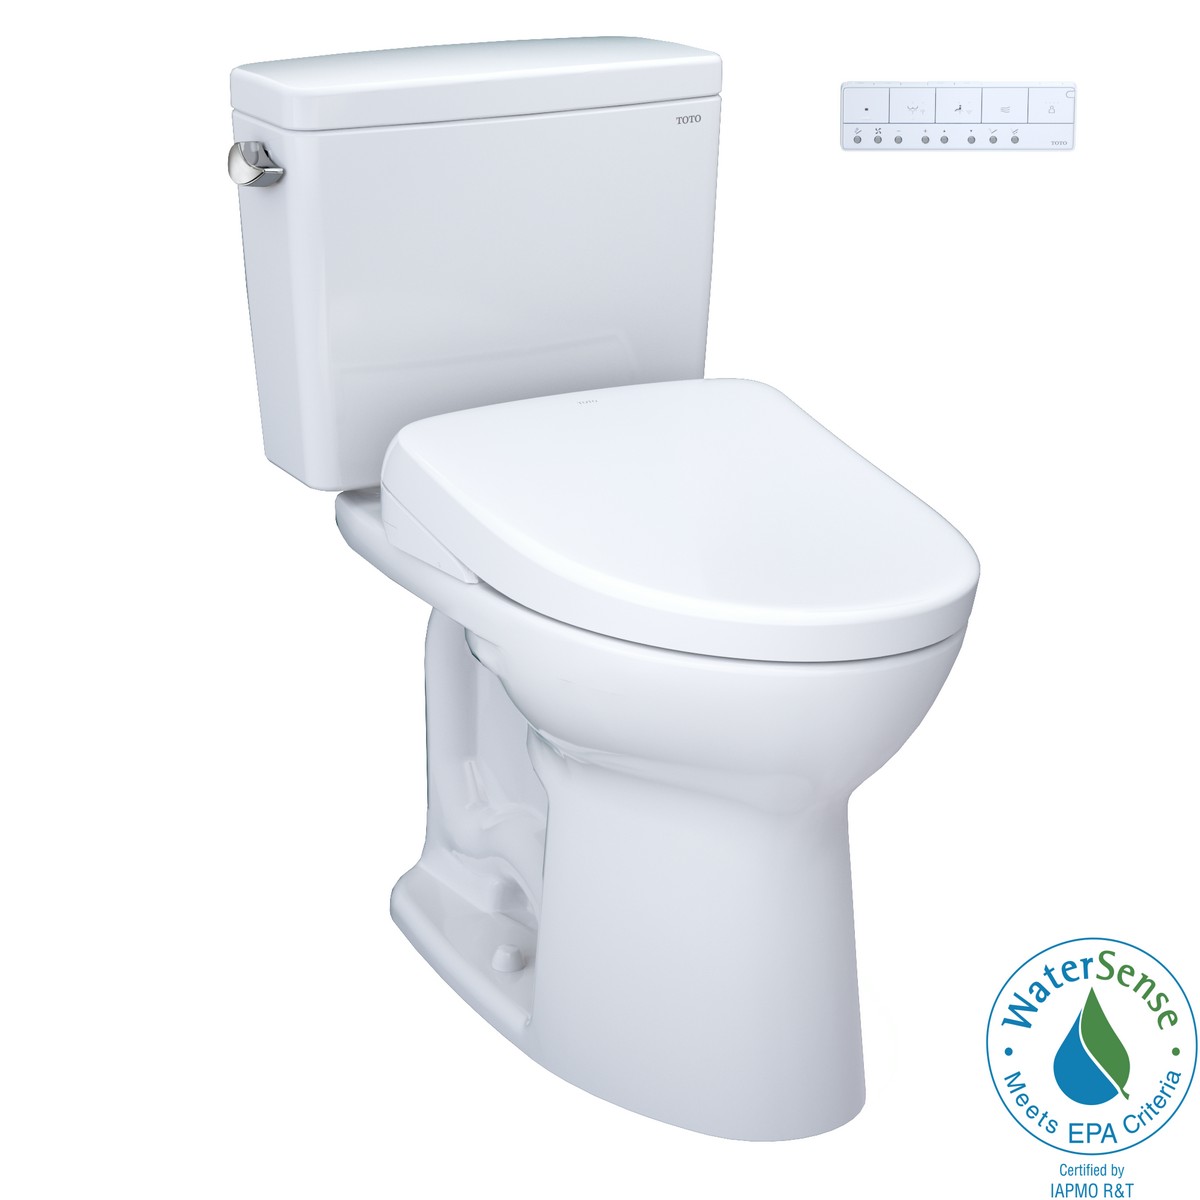 TOTO MW7764736CEF.10#01 DRAKE WASHLET+ 1.28 GPF TWO PIECE 10 INCH ROUGH-IN ELONGATED UNIVERSAL HEIGHT TORNADO FLUSH TOILET WITH WASHLET S7A BIDET SEAT IN COTTON WHITE